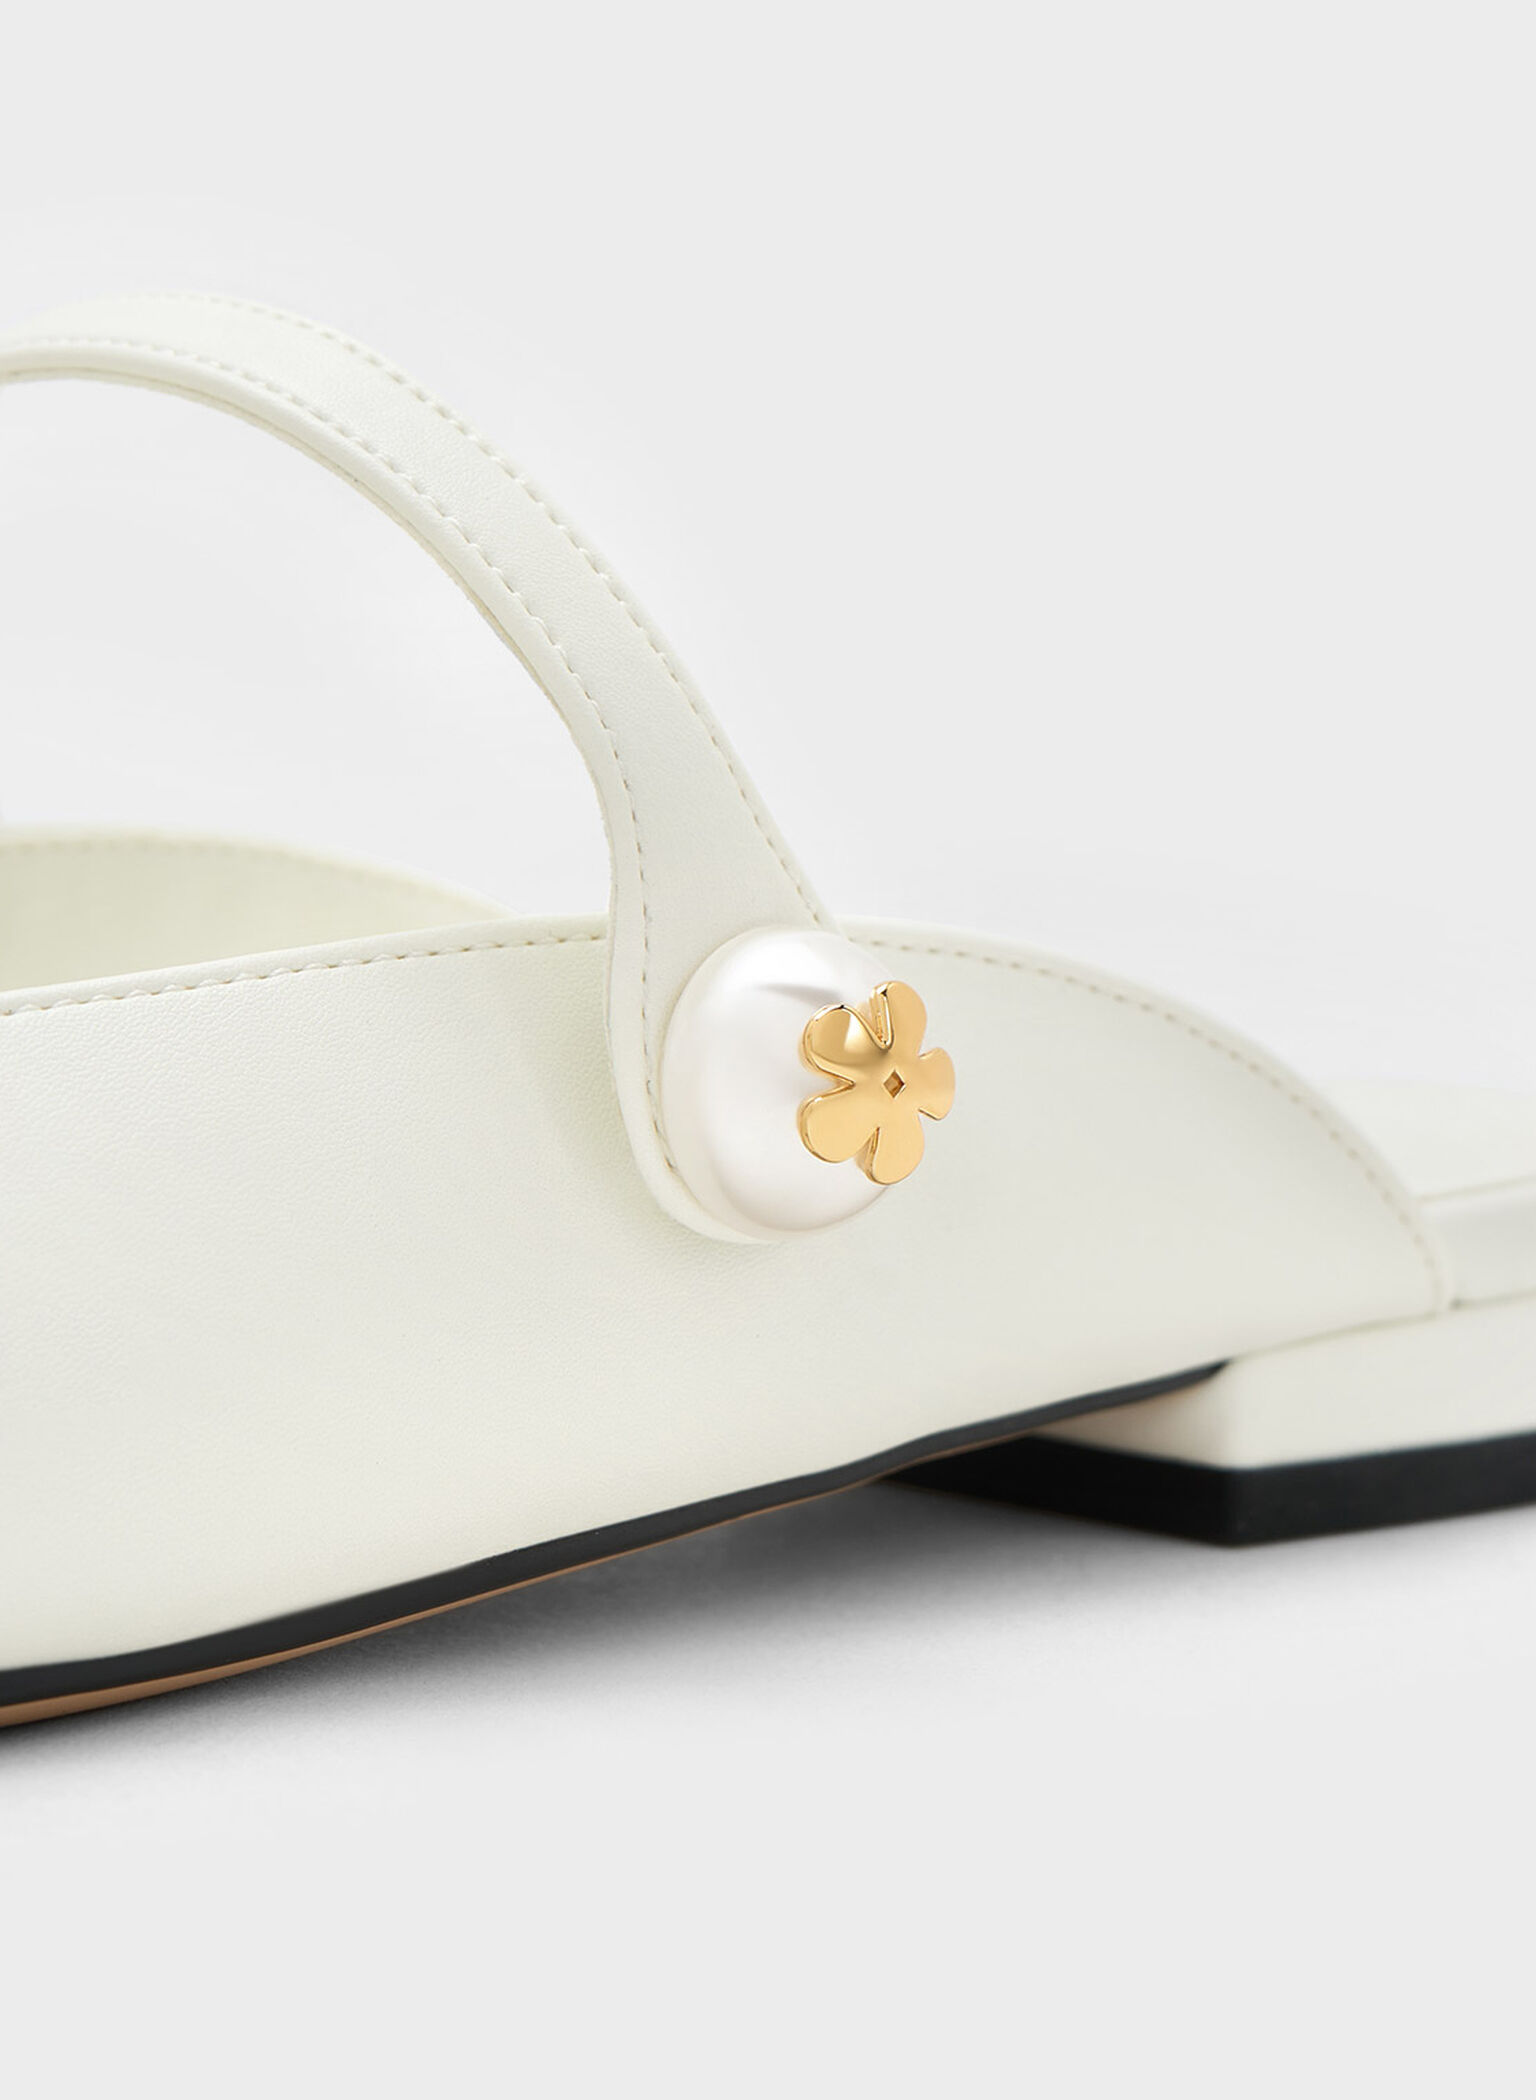 Charles & Keith Women's Pearl Embellished Flat Mules